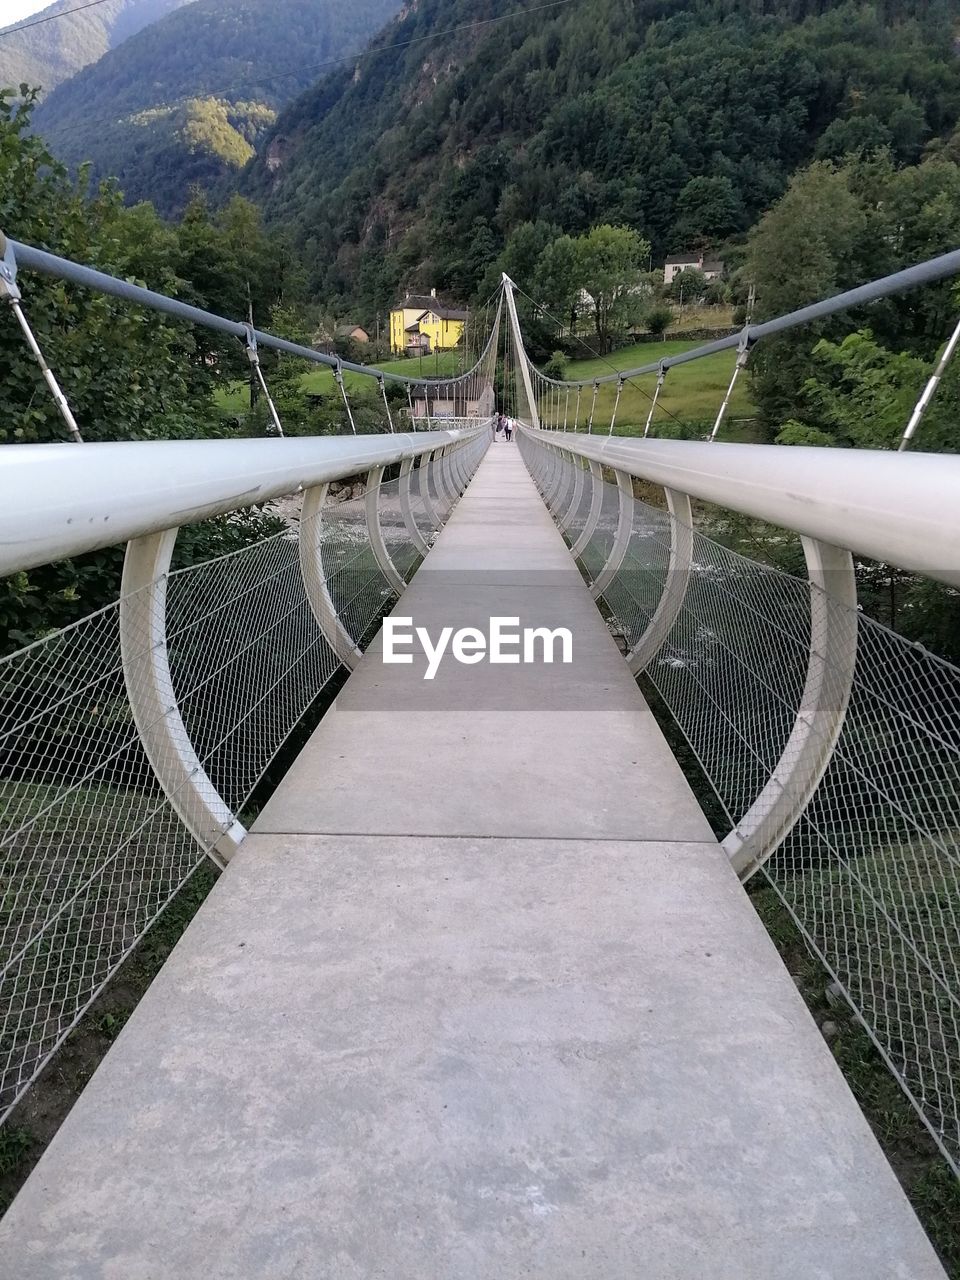 mountain, bridge, suspension bridge, the way forward, nature, railing, architecture, built structure, transportation, tree, scenics - nature, environment, plant, mountain range, beauty in nature, land, footbridge, no people, tranquility, day, landscape, sky, outdoors, travel, travel destinations, tranquil scene, forest, non-urban scene, water, tourism, rope bridge, diminishing perspective, road, rope, footpath